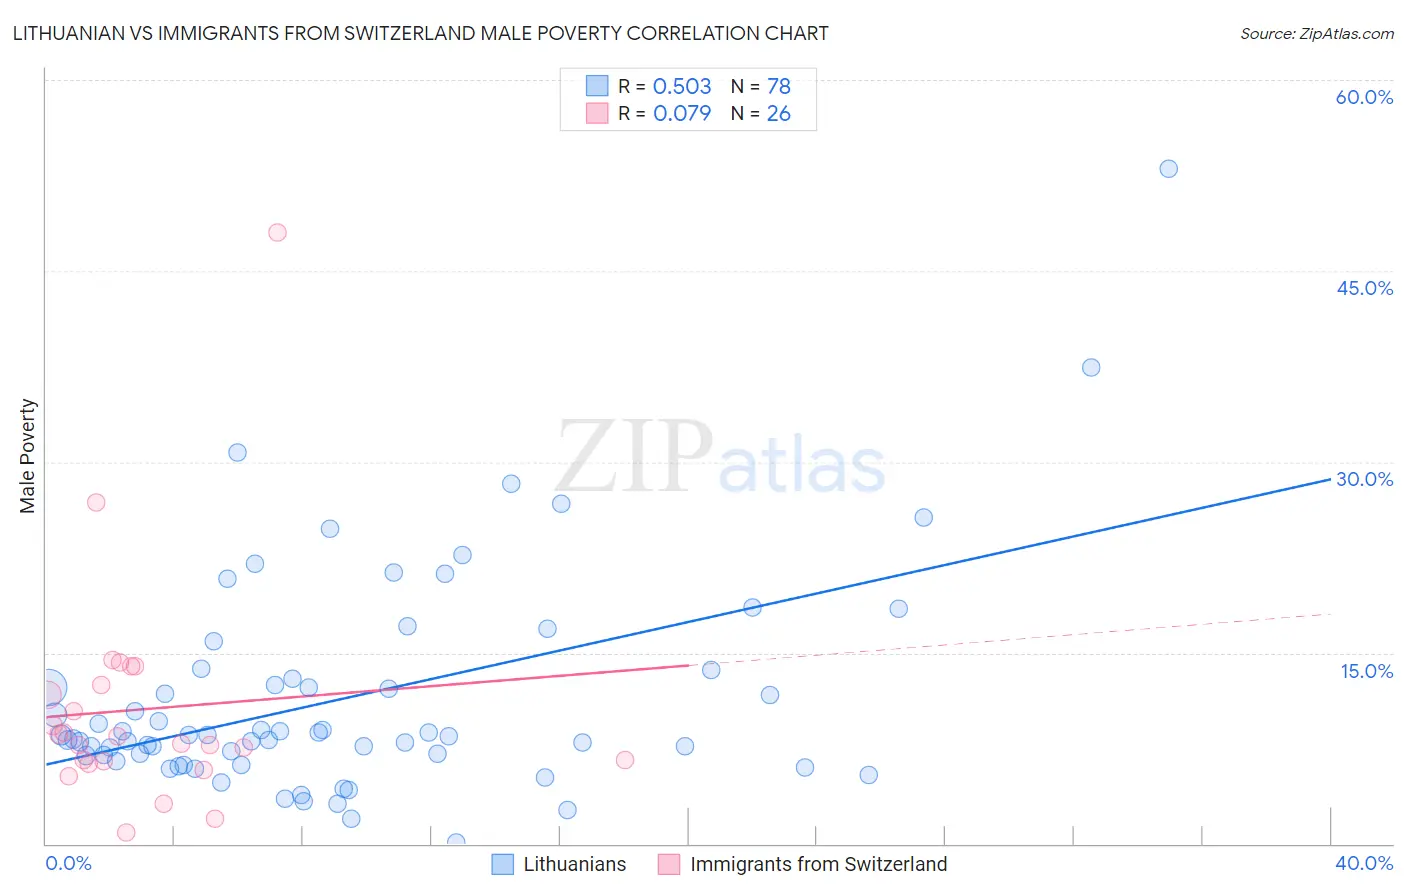 Lithuanian vs Immigrants from Switzerland Male Poverty